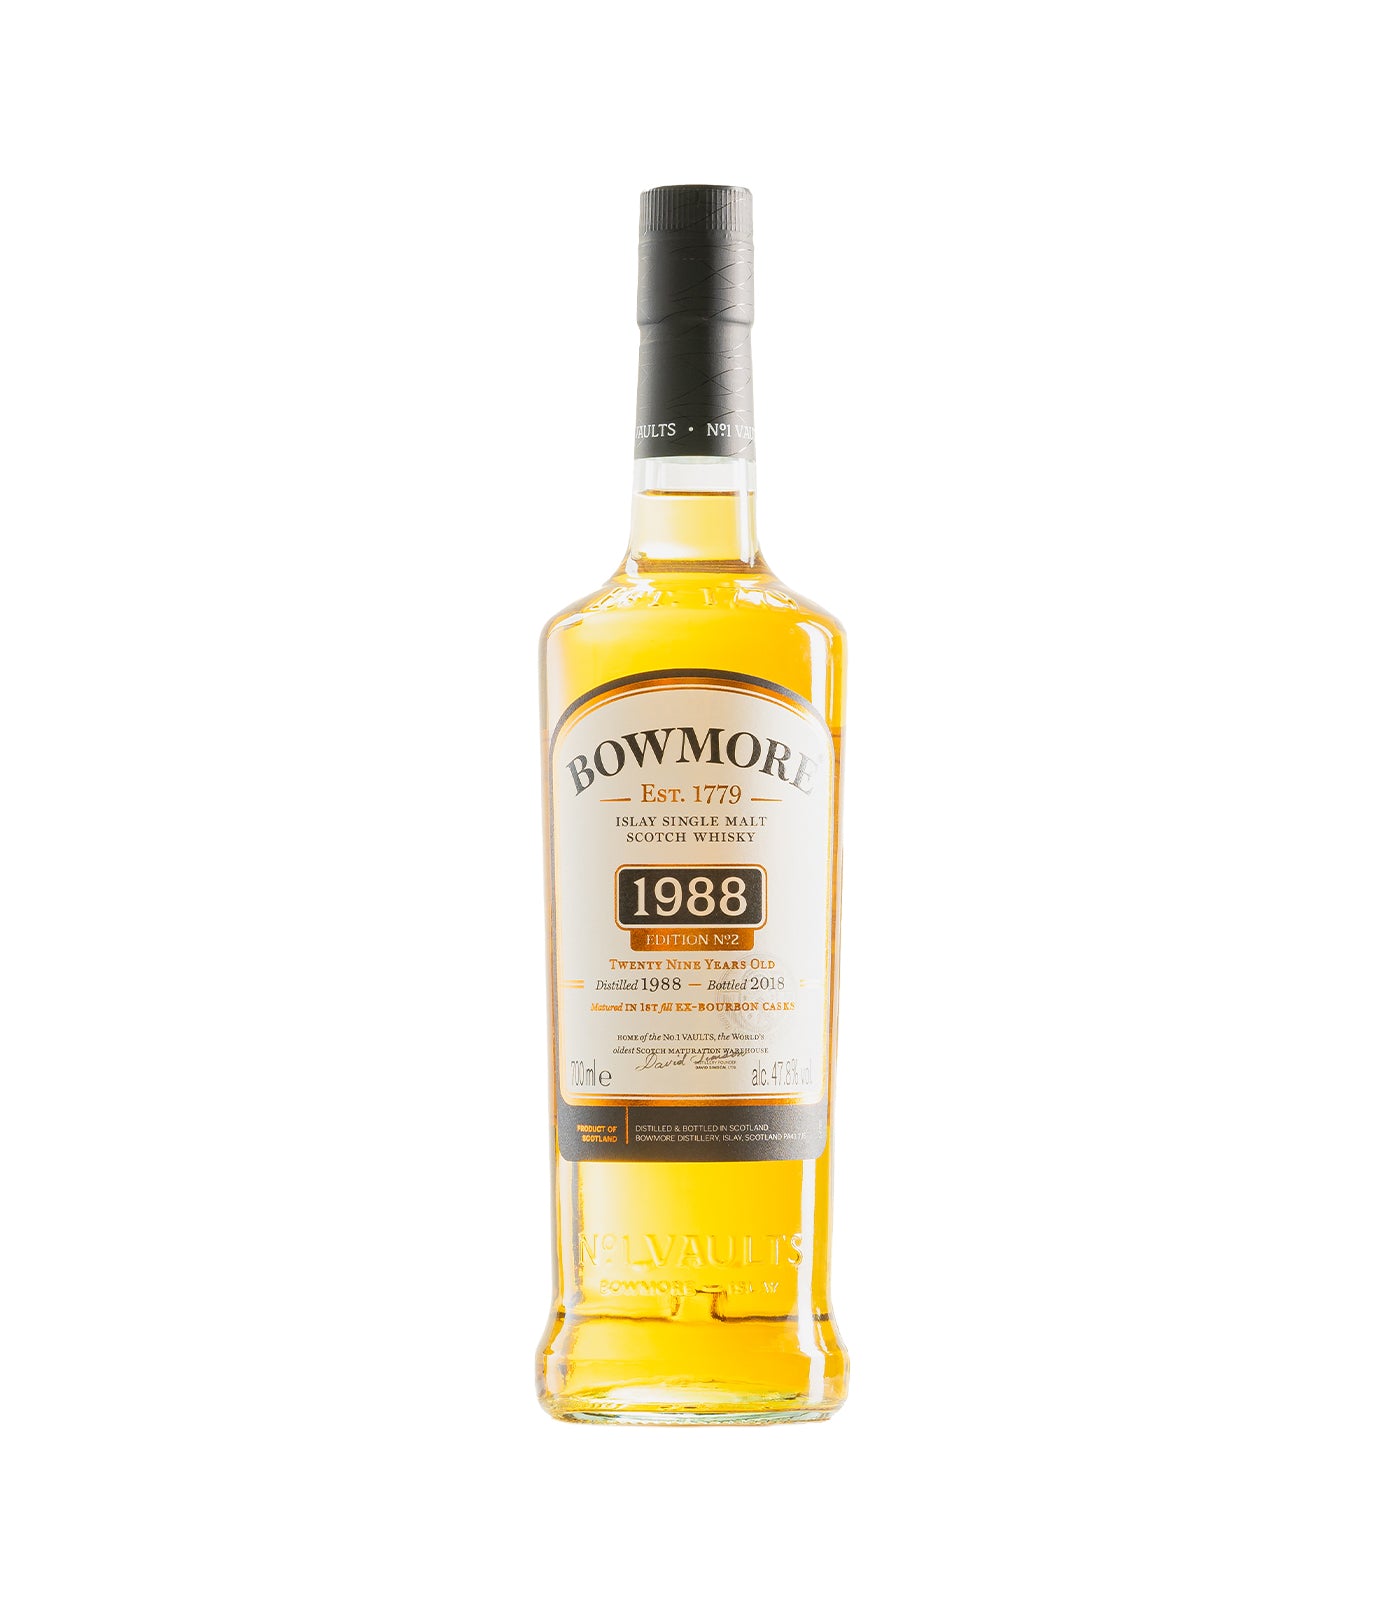 Bowmore 1988 29 Year Old Edition No. 2 (70cl; 47.8%)